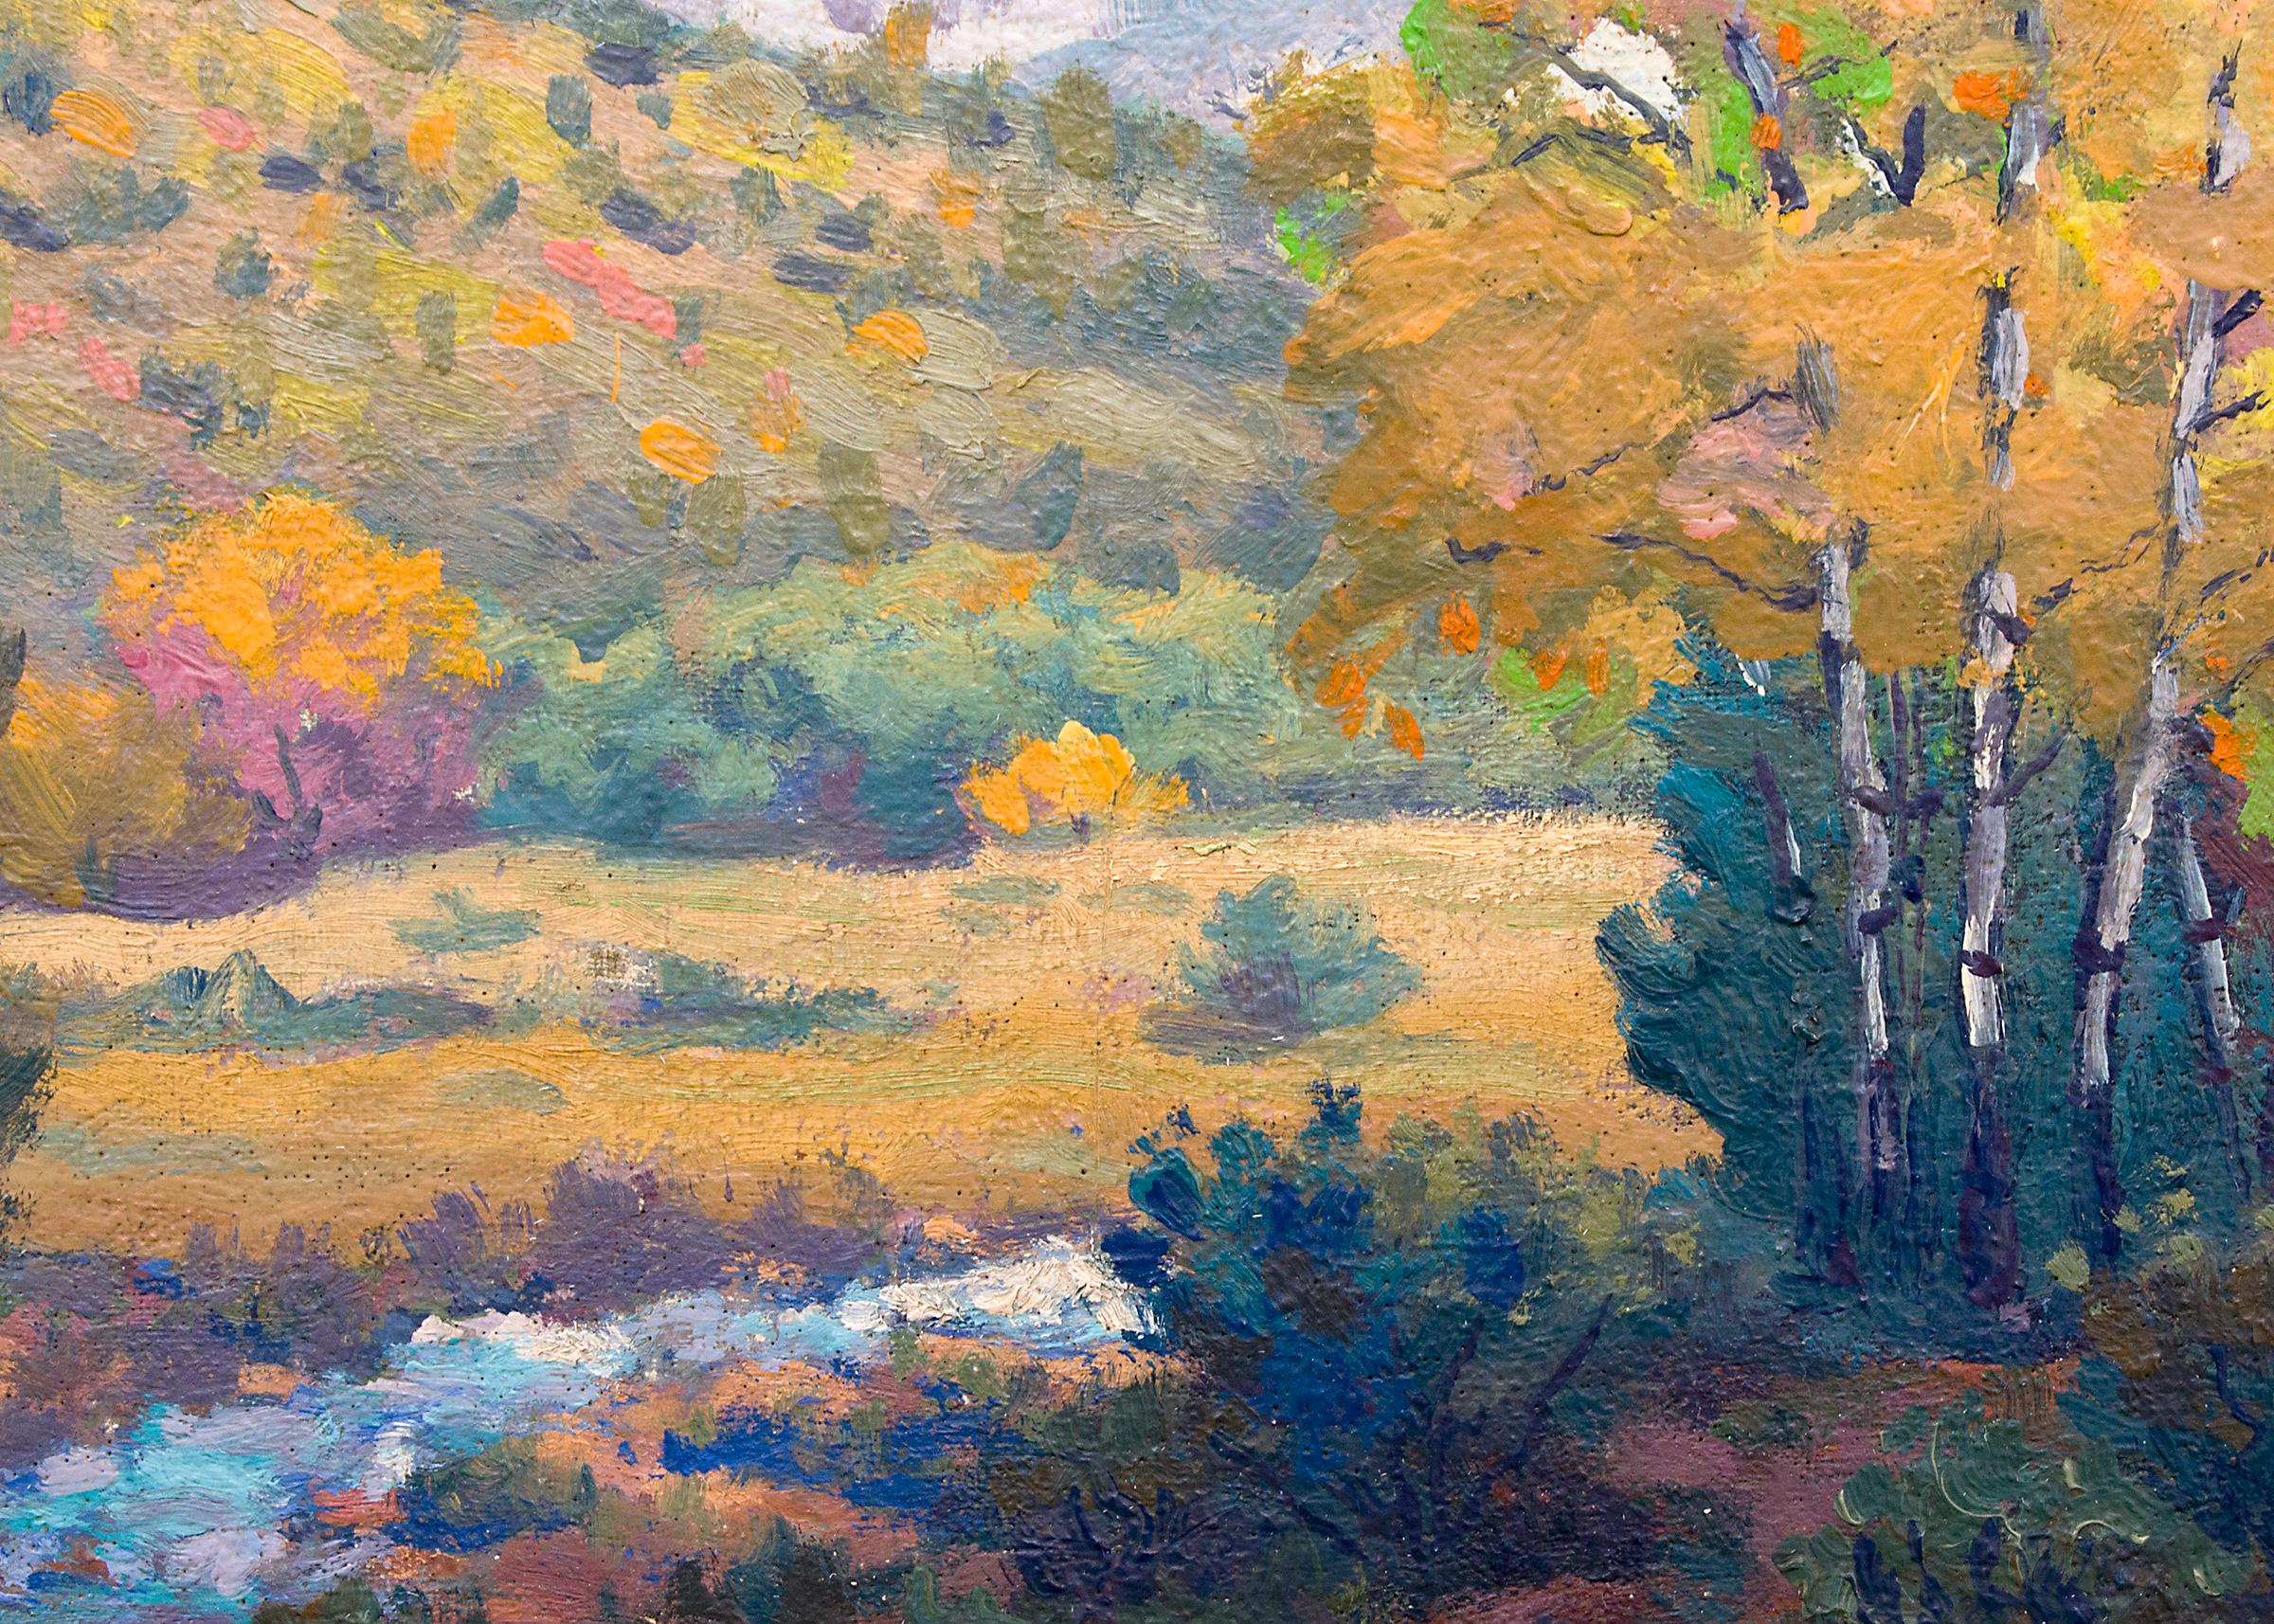 Vintage mountain landscape painting of Blanca Peak covered in snow with a creek and trees with autumn/fall coloring by Harold Skene (1883-1978). Blanca is part of the Sangre de Cristo range of the Rocky Mountains located near Alamosa in southern